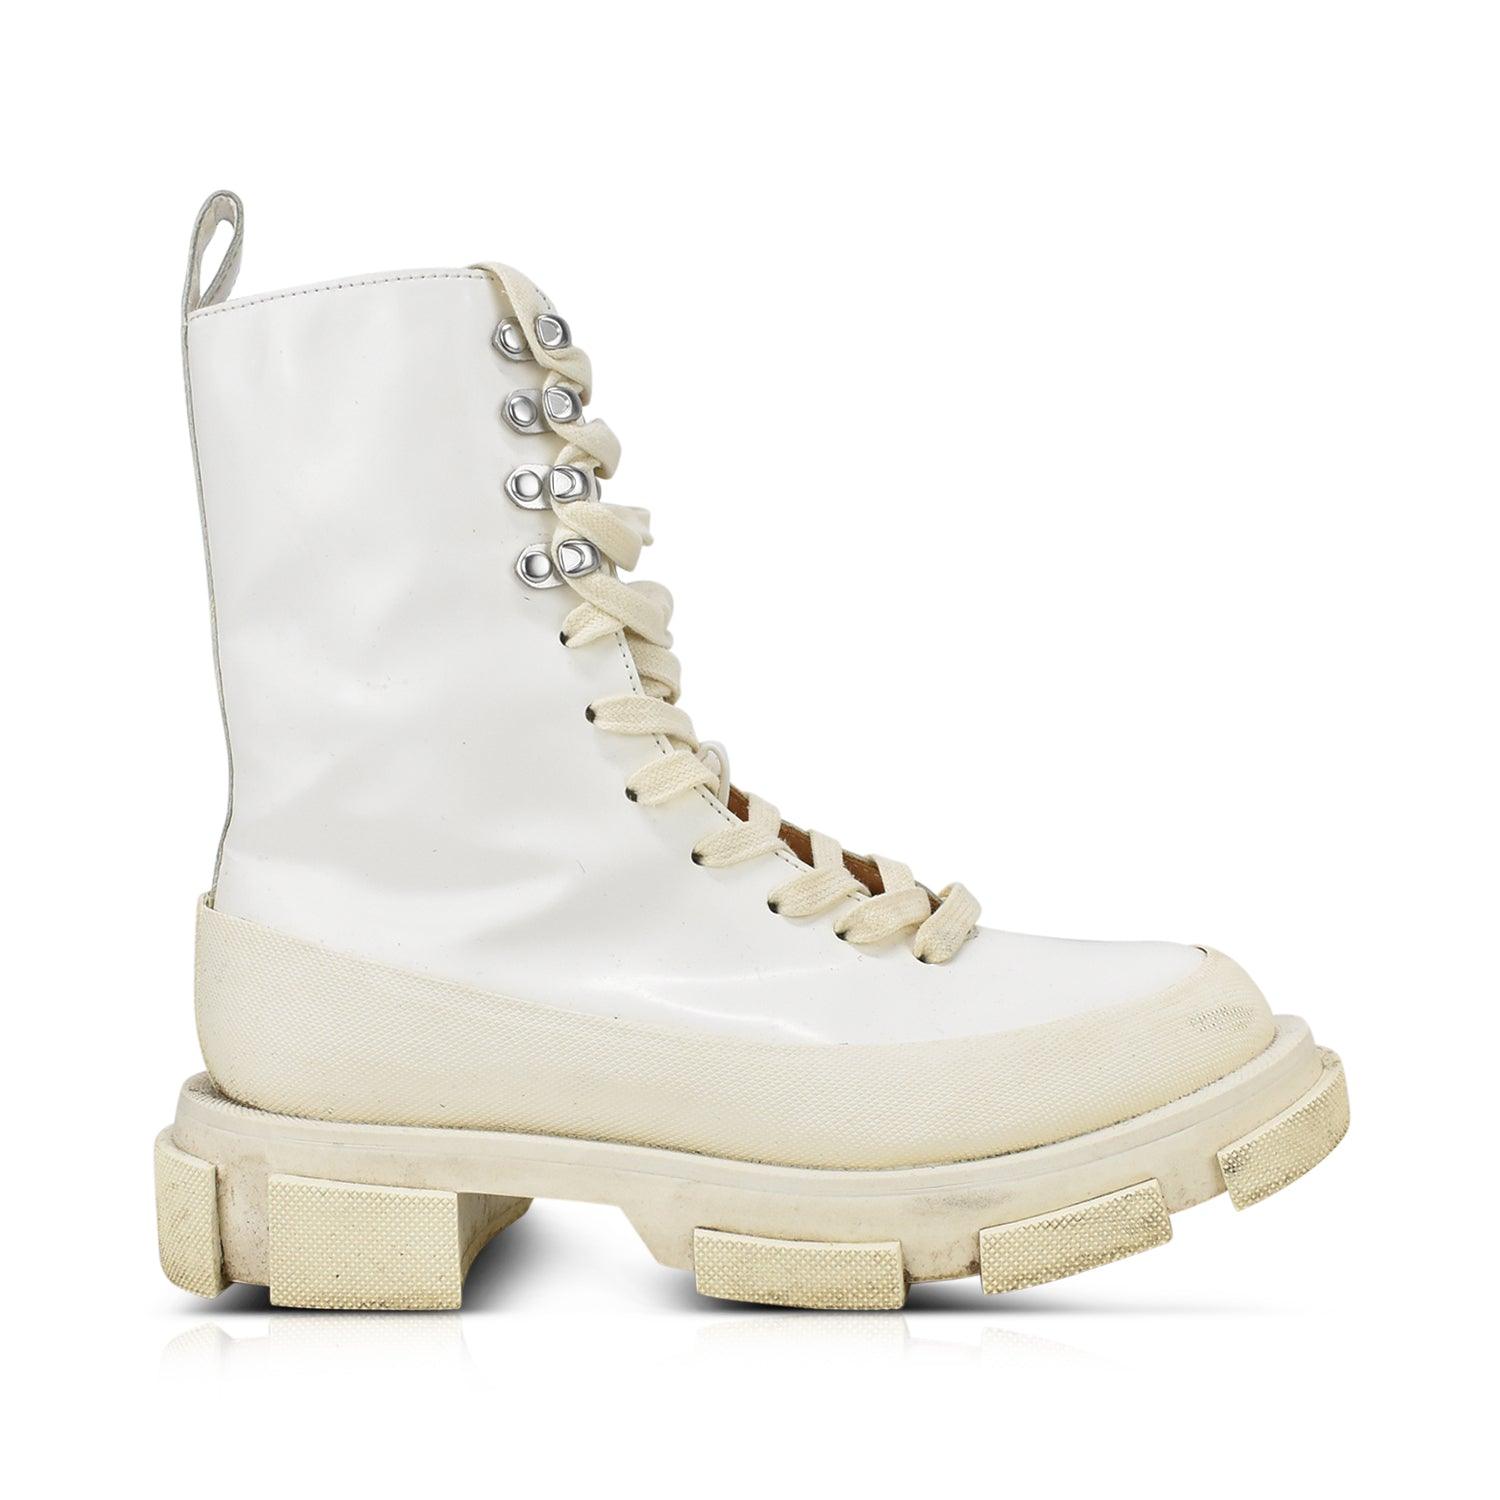 Both Combat Boots - Women's 36 - Fashionably Yours